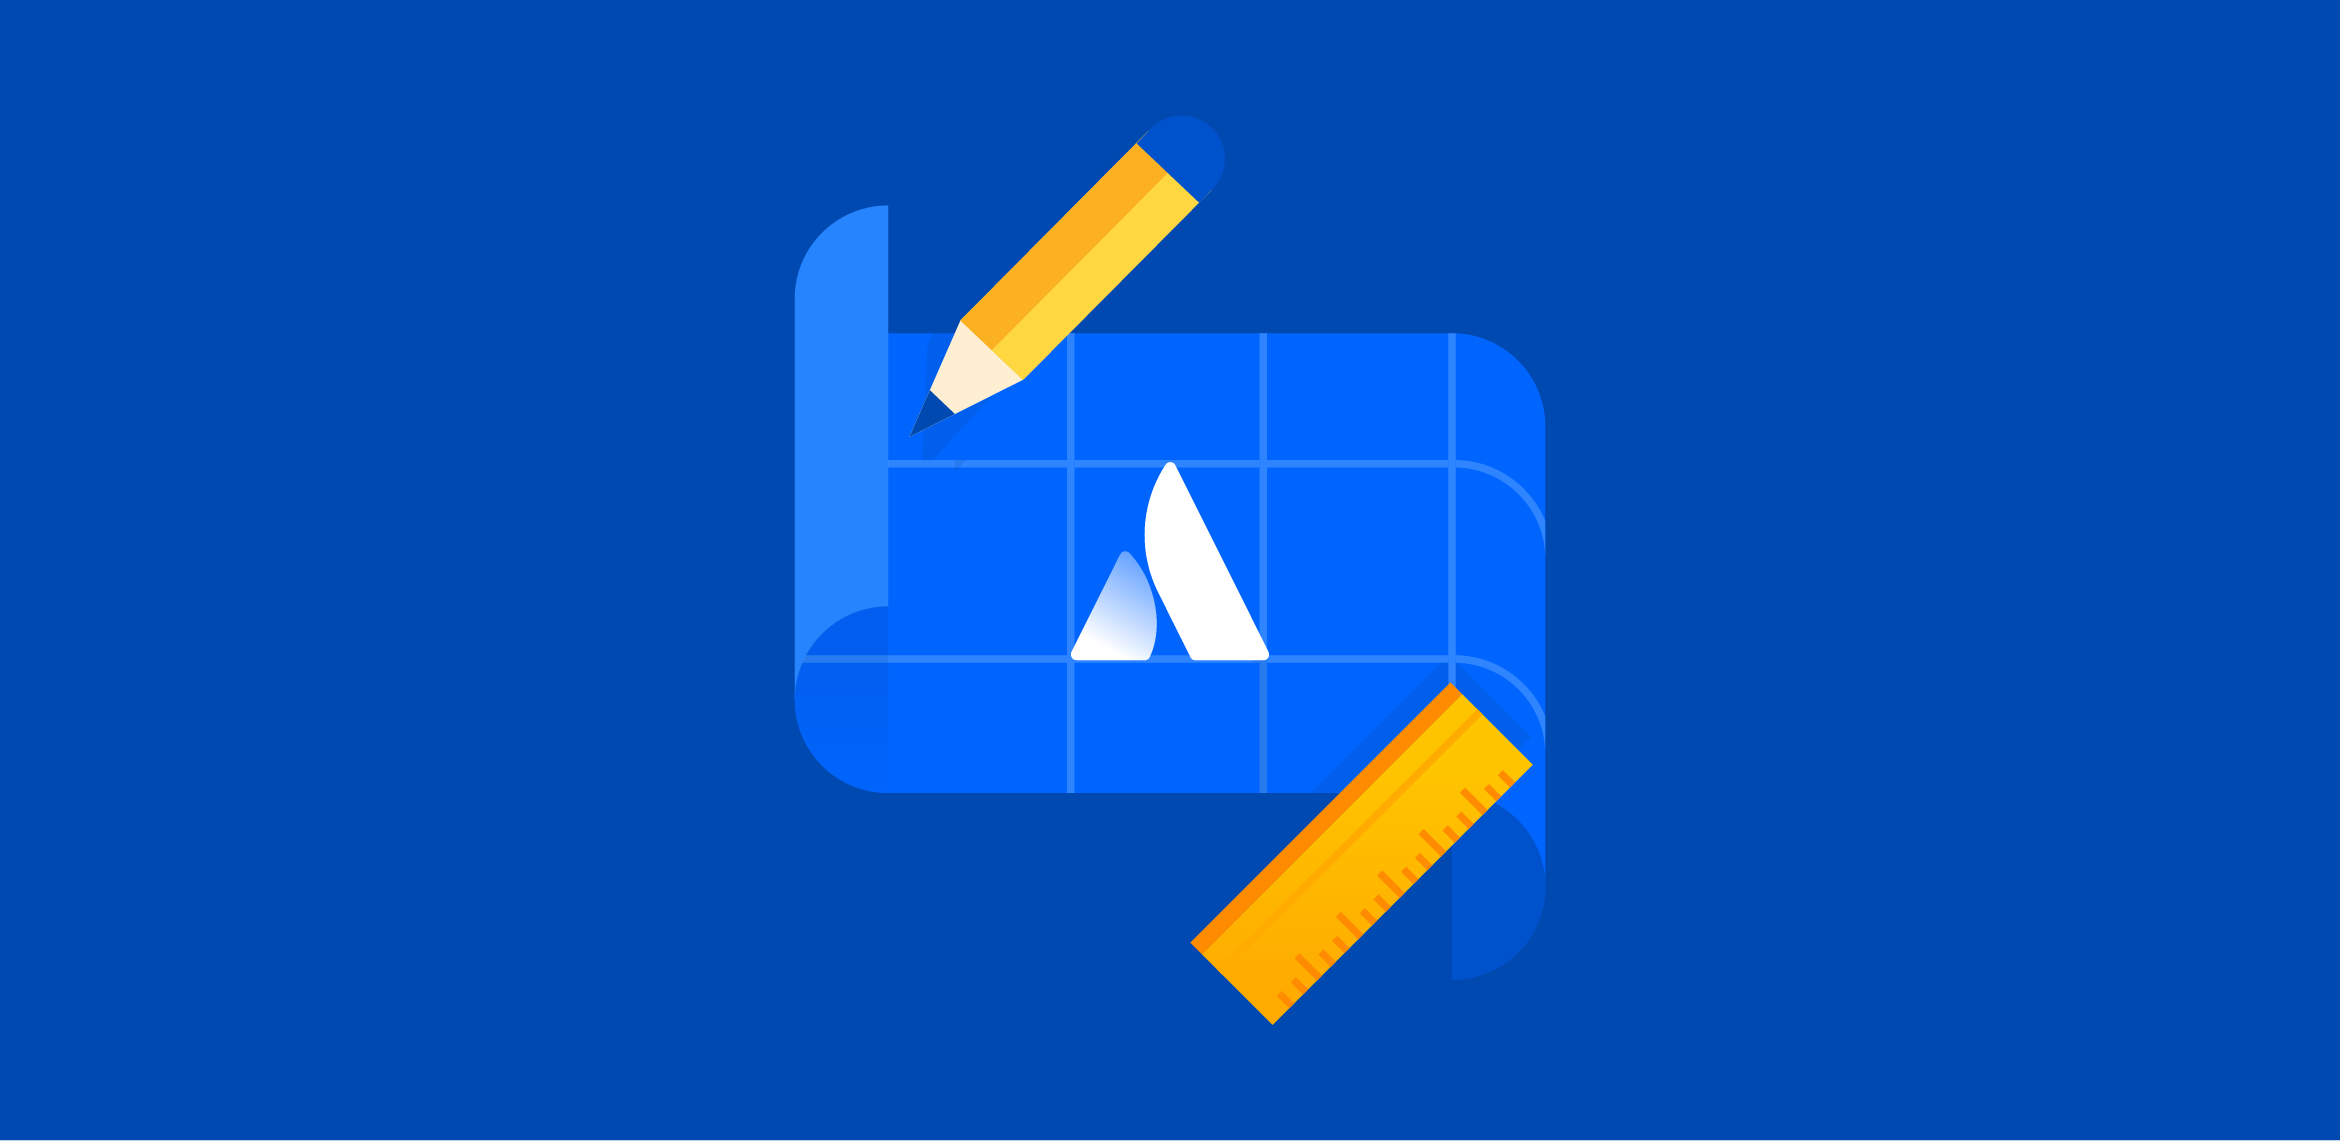 Our bold new brand - Work Life by Atlassian